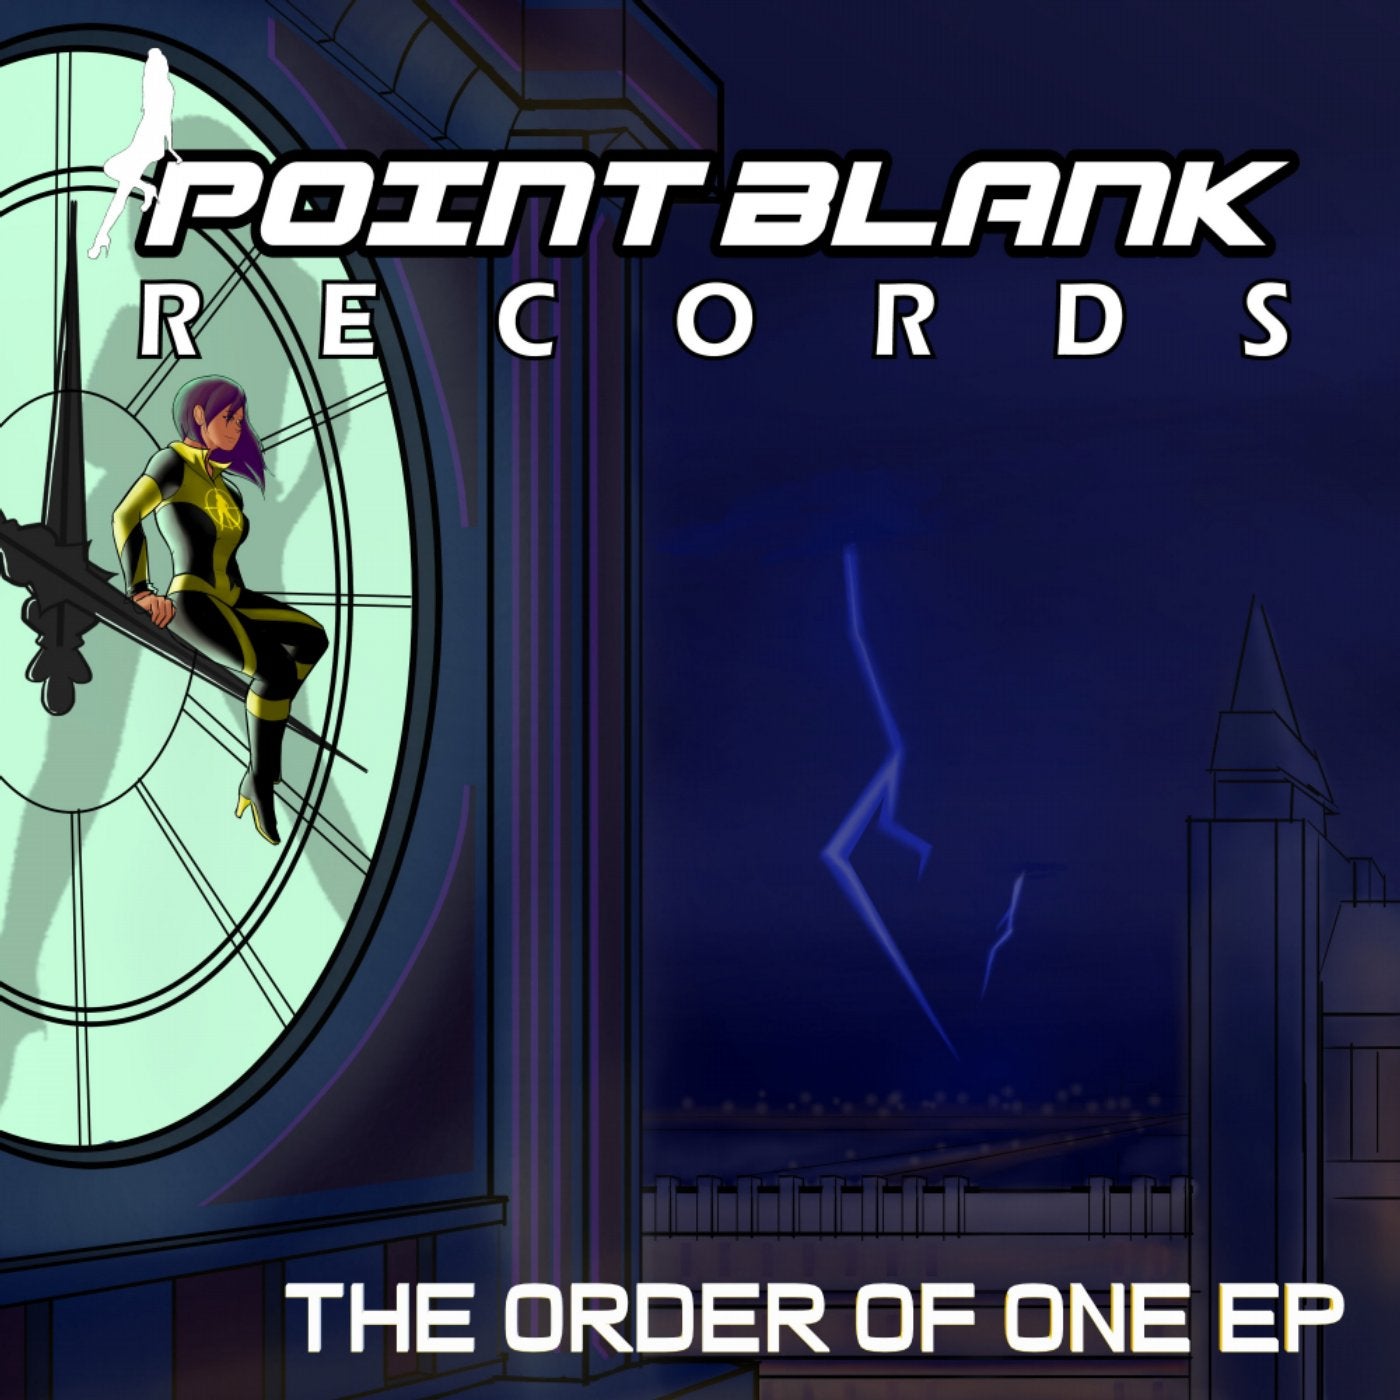 The Order of One EP